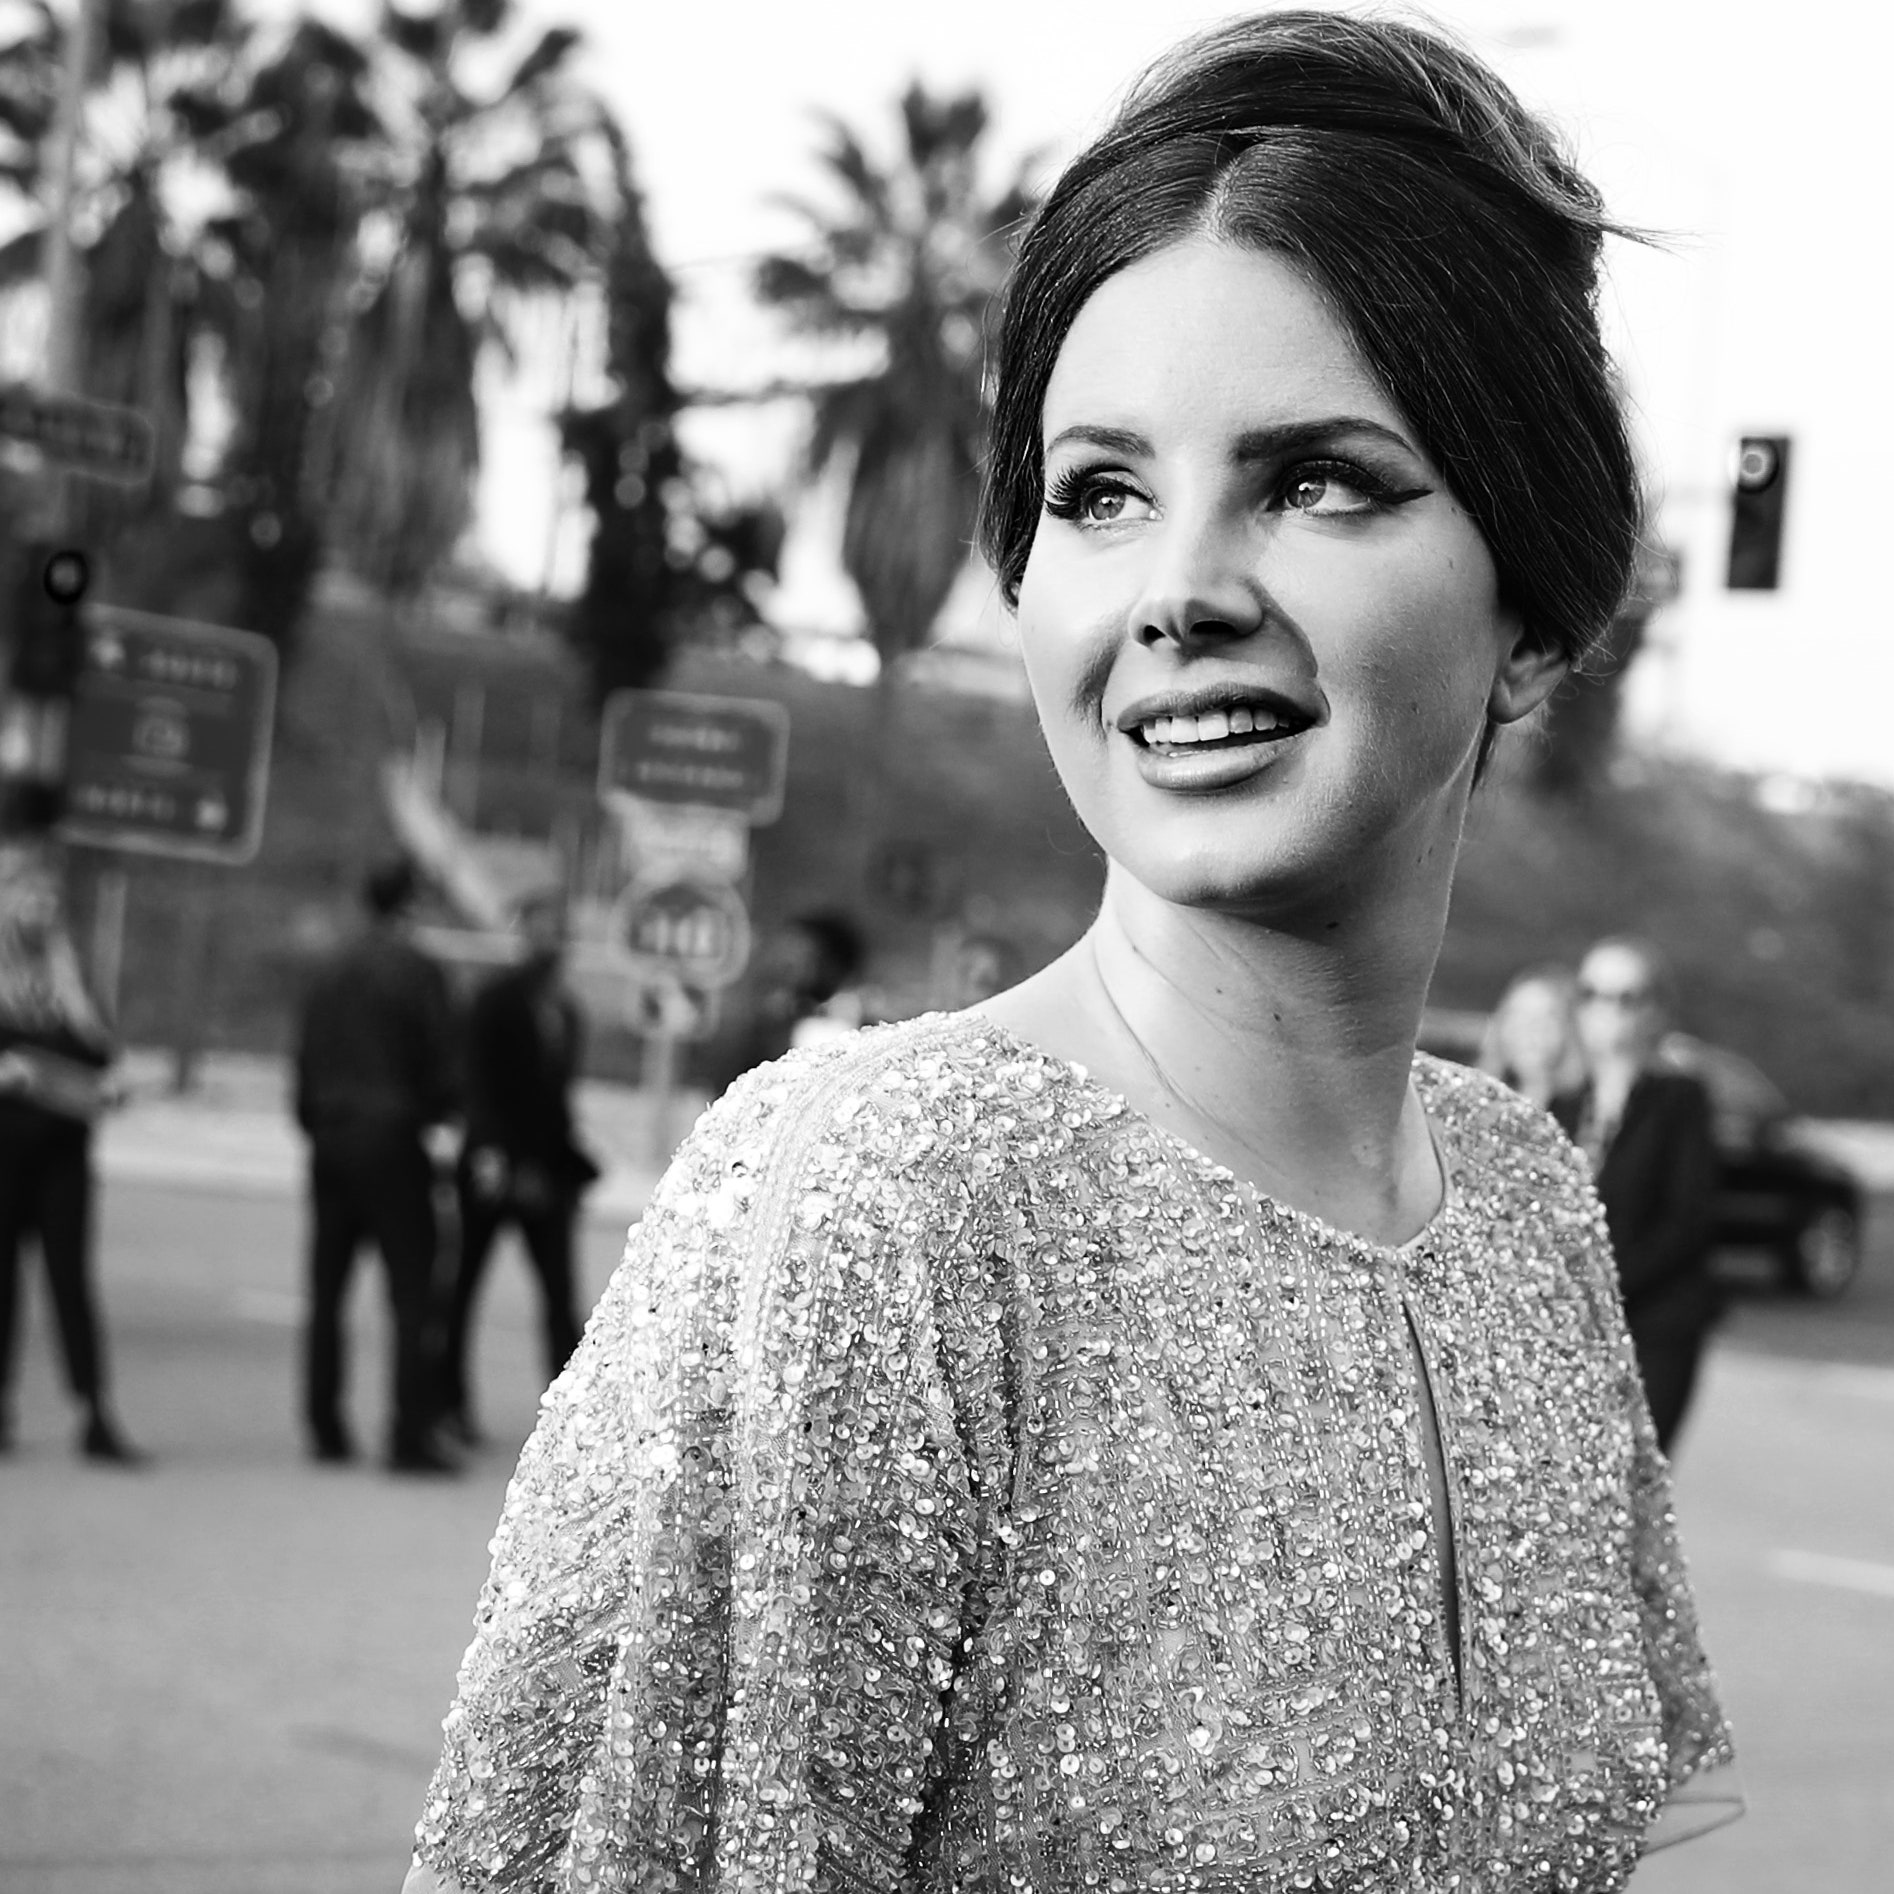 Lana Del Rey releases a new album Blue Banisters